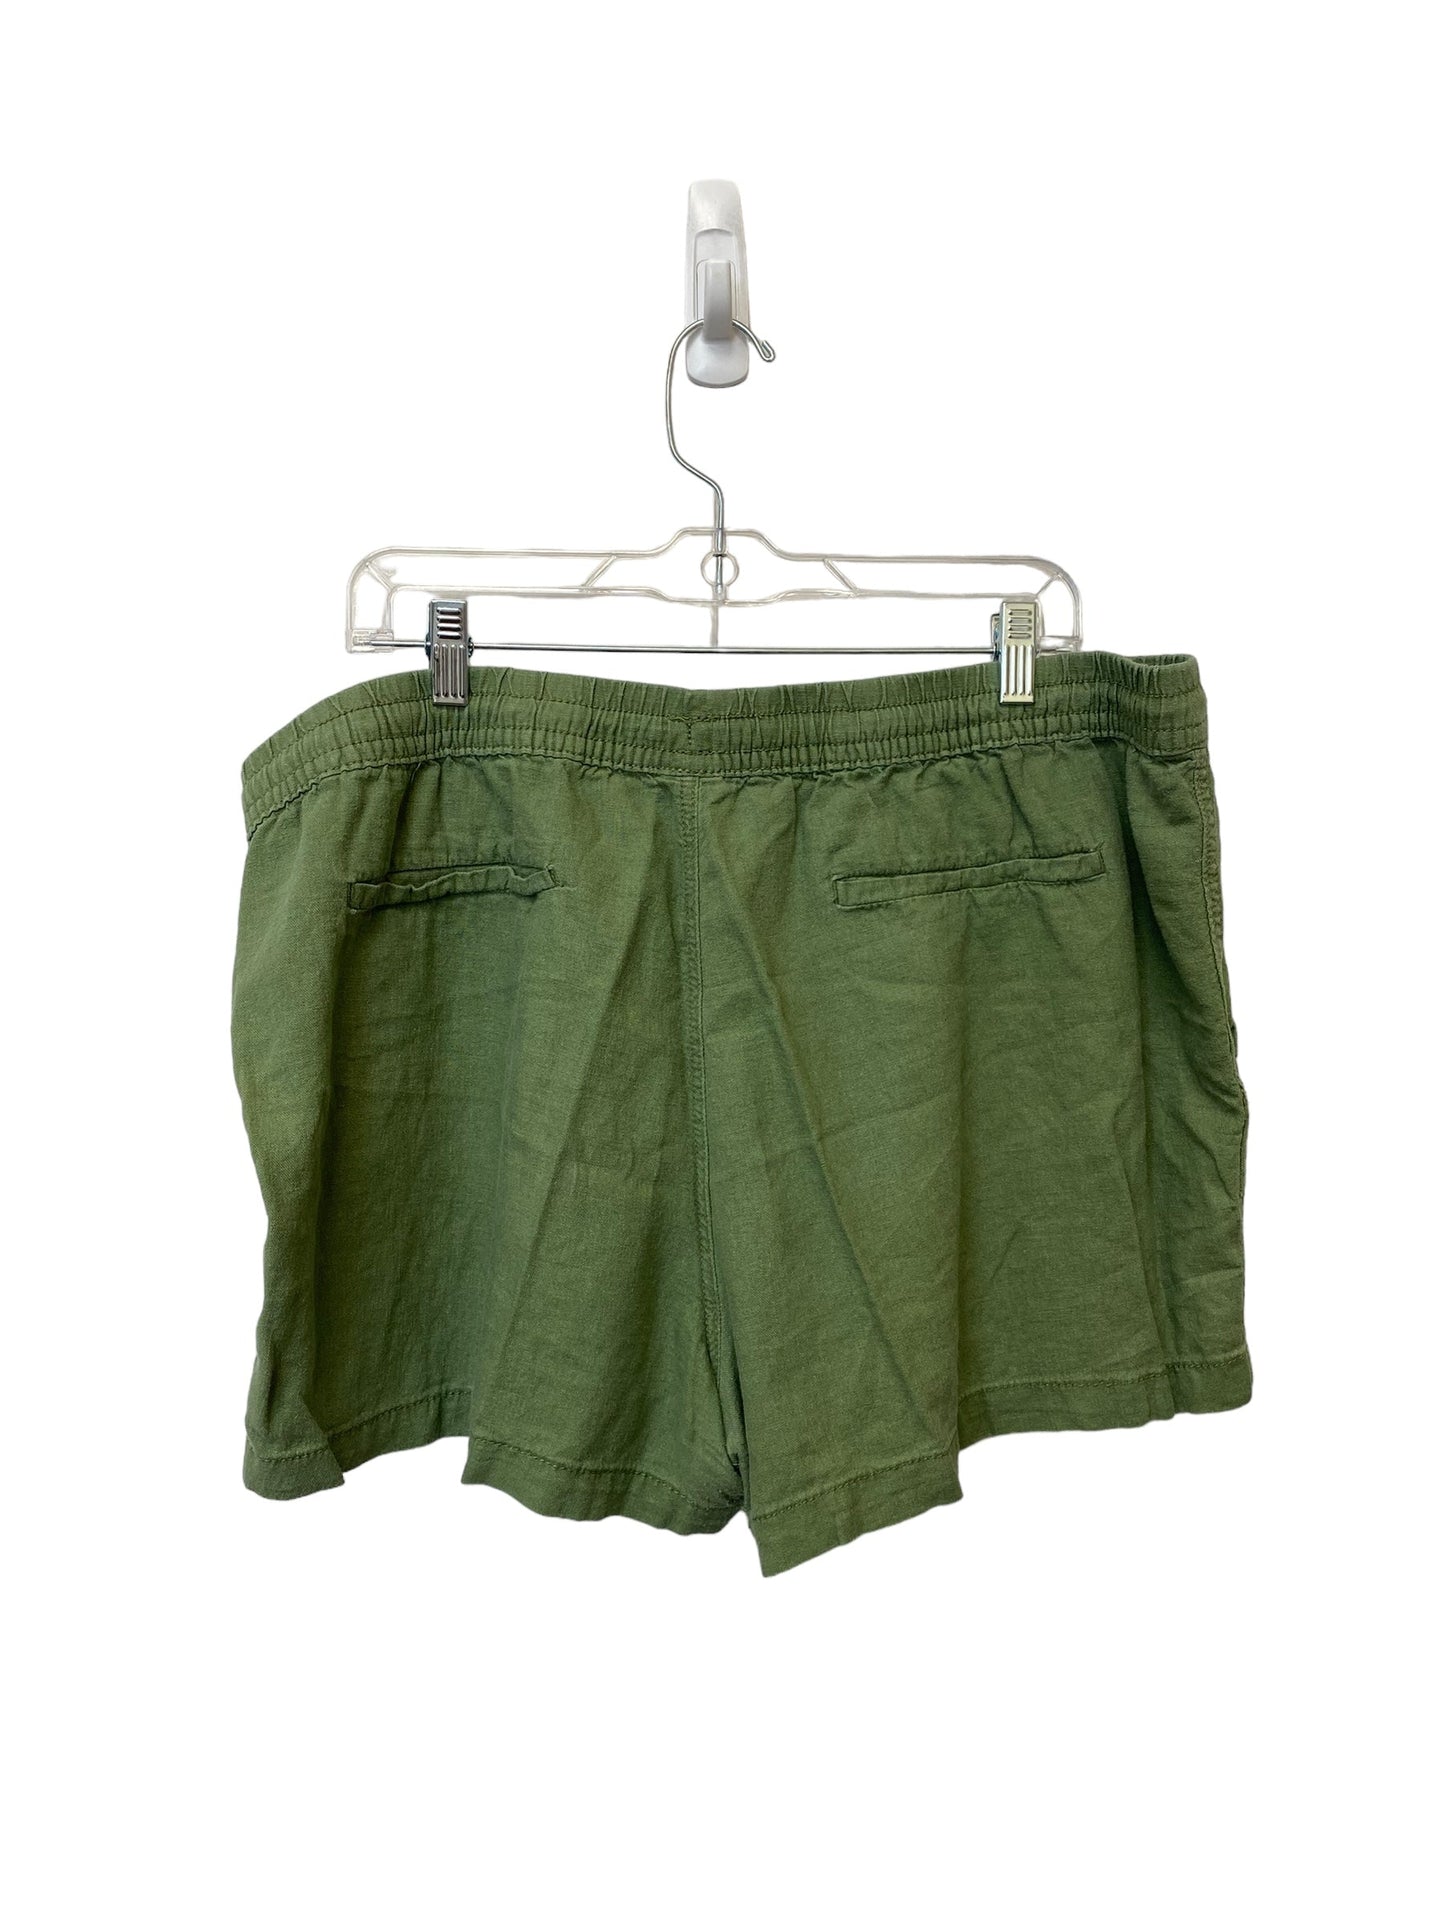 Green Shorts Time And Tru, Size Xxl